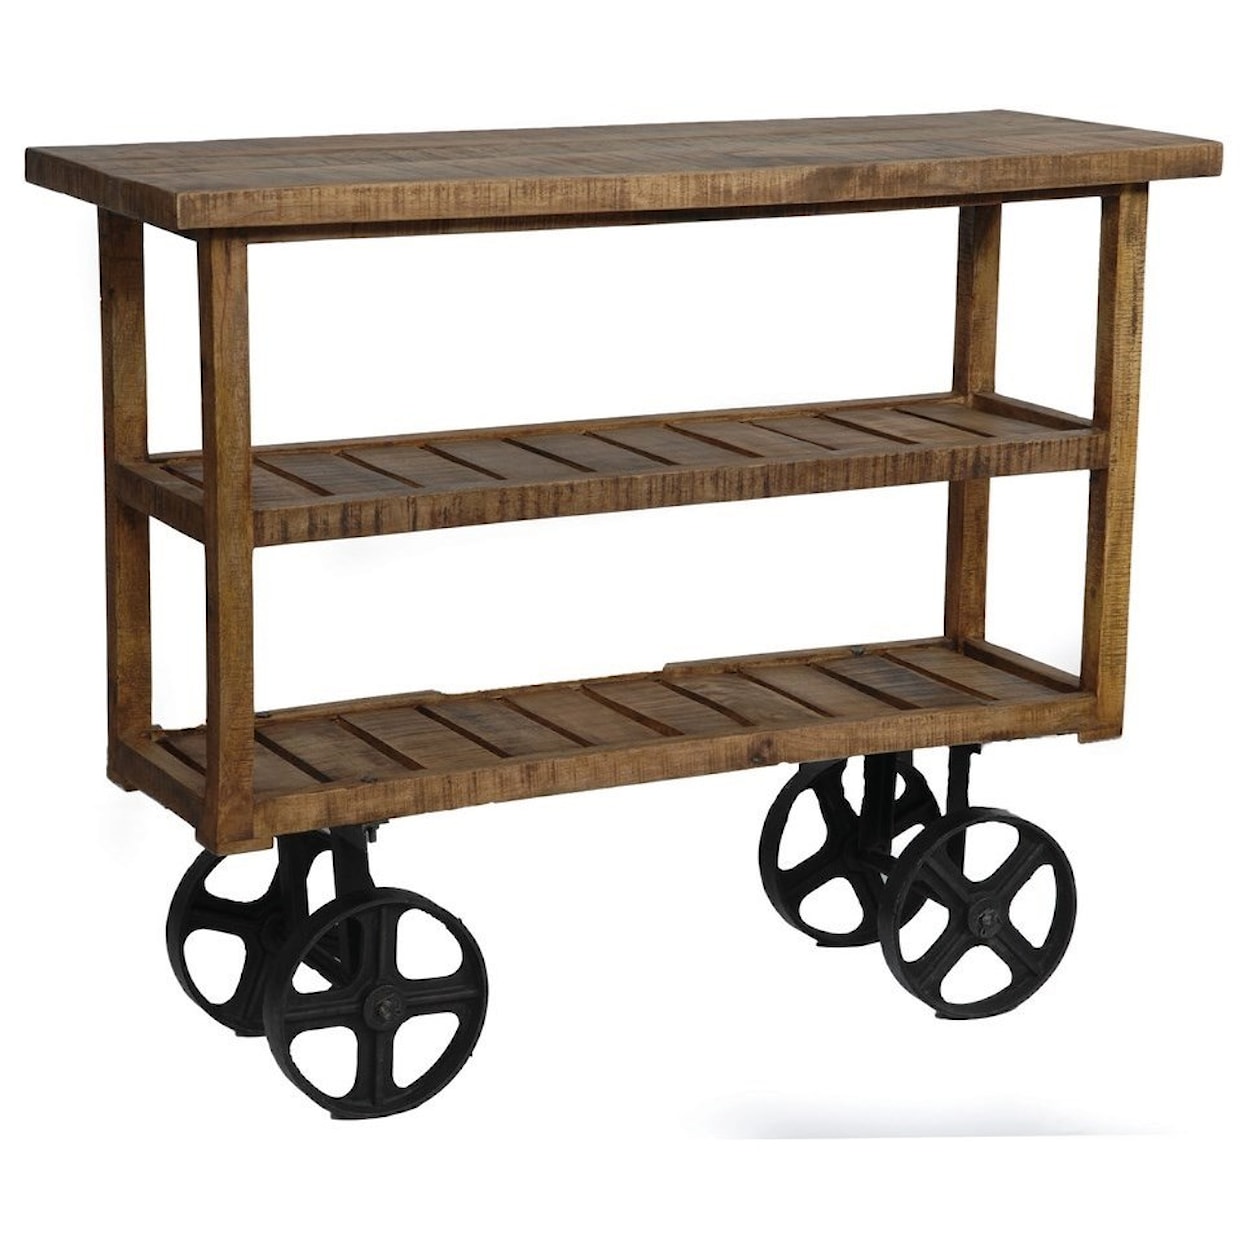 Crestview Collection Accent Furniture Bengal Manor Mango Wood Industrial Cart